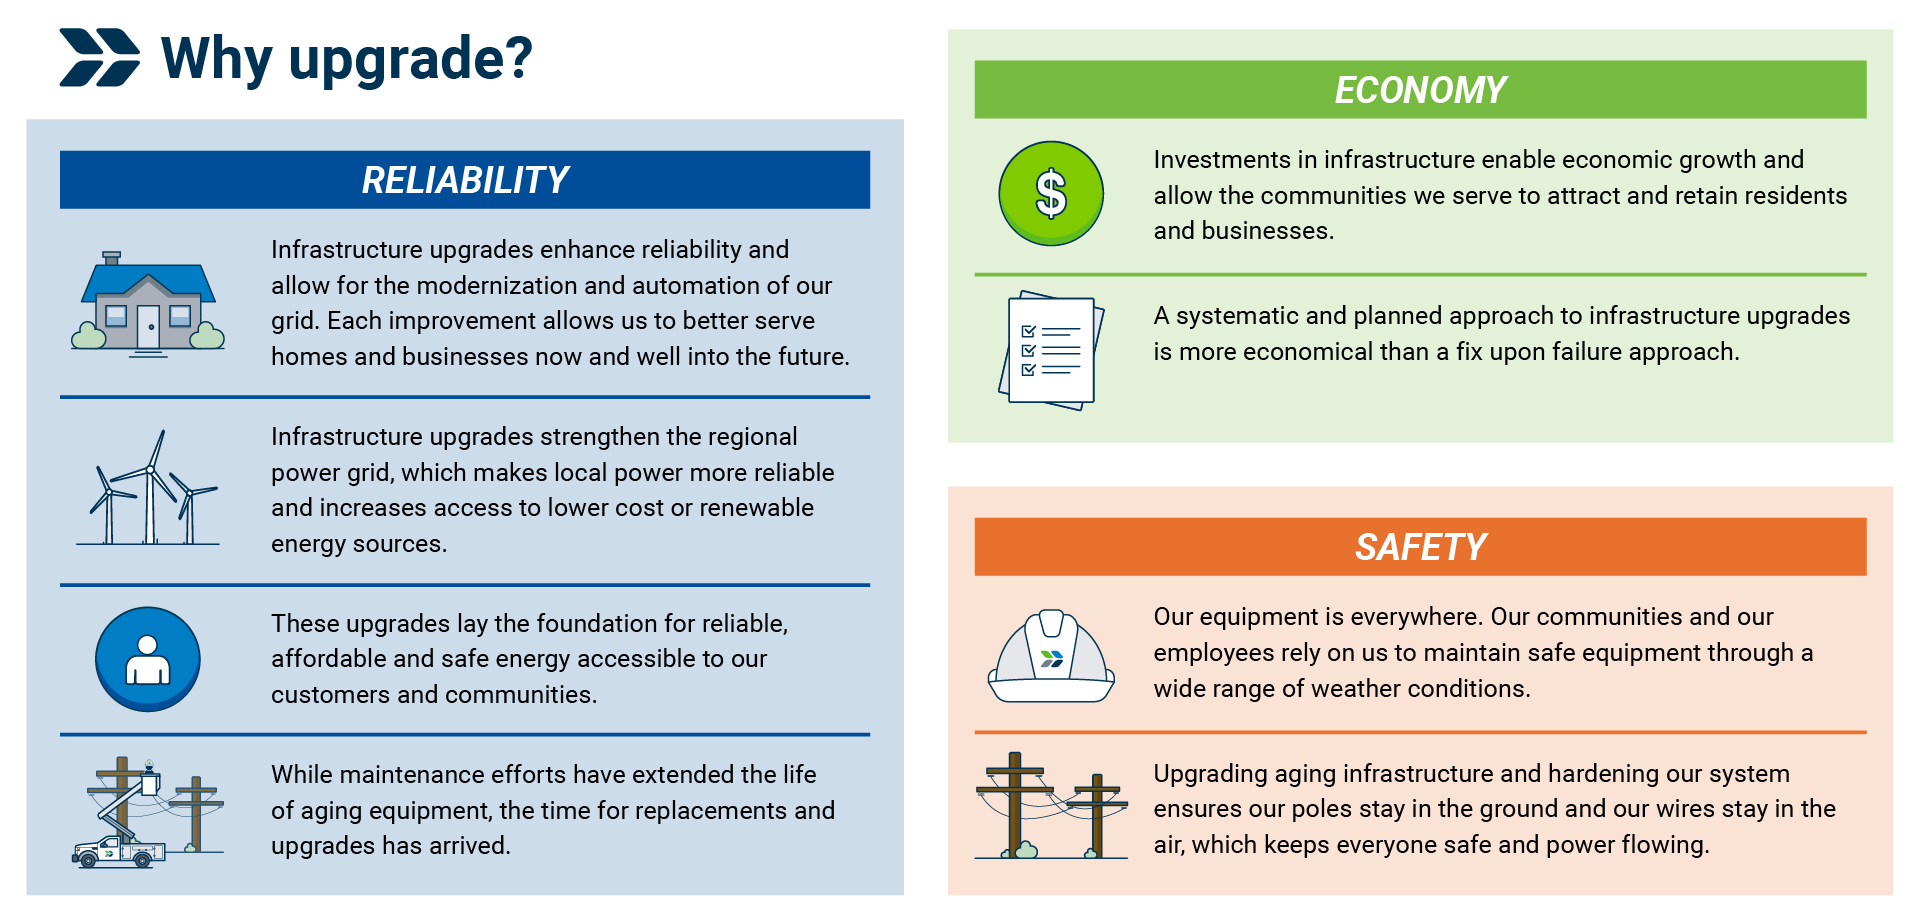 Why Upgrade infographic - because of reliability, economy and safety